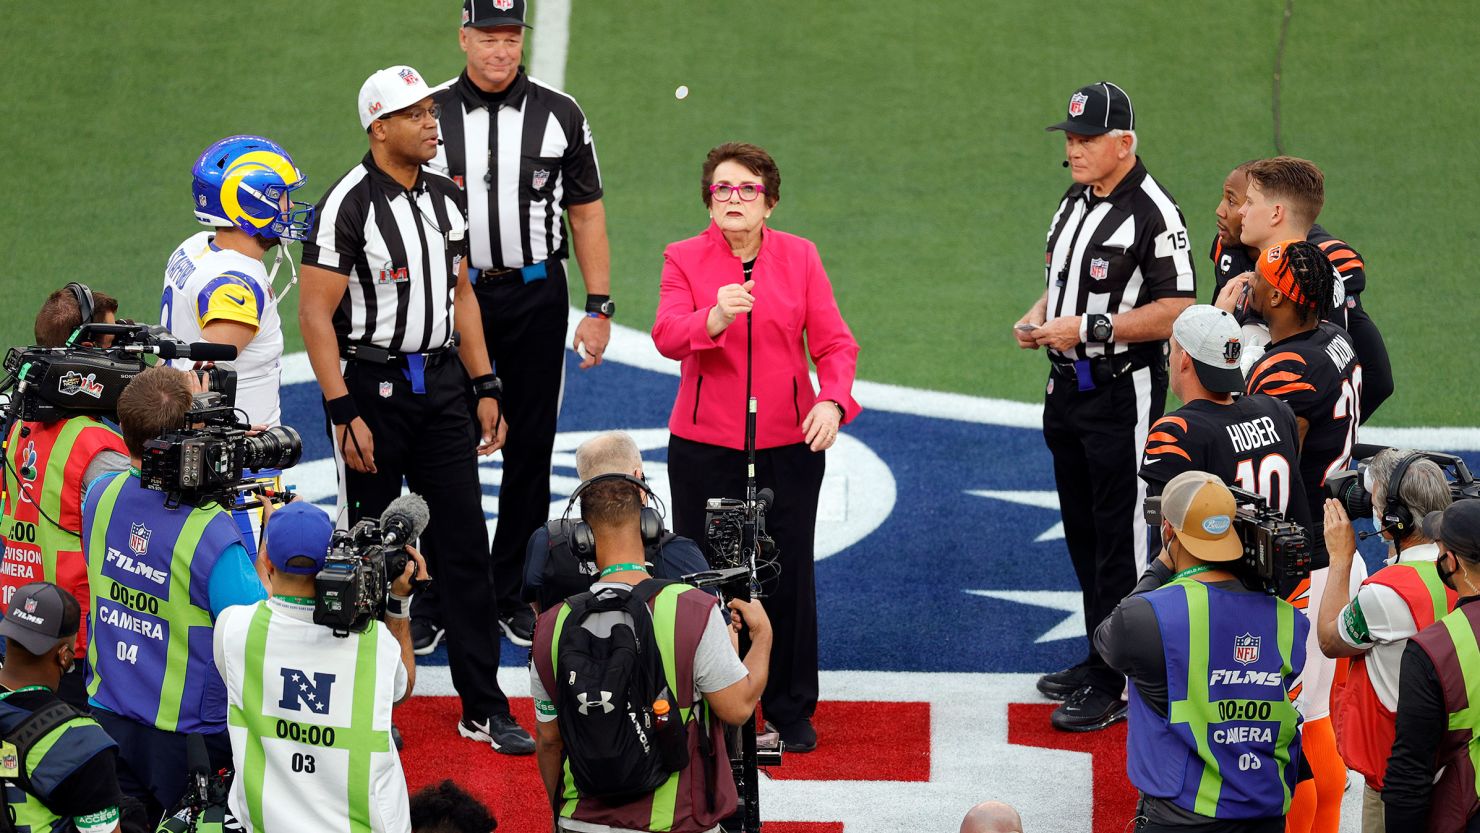 Billie Jean King performs the coin toss on the field with referee Ronald Torbert (62) before the NFL Super Bowl 56 football game between the Los Angeles Rams and the Cincinnati Bengals, Sunday, Feb. 13, 2022 in Inglewood, CA.